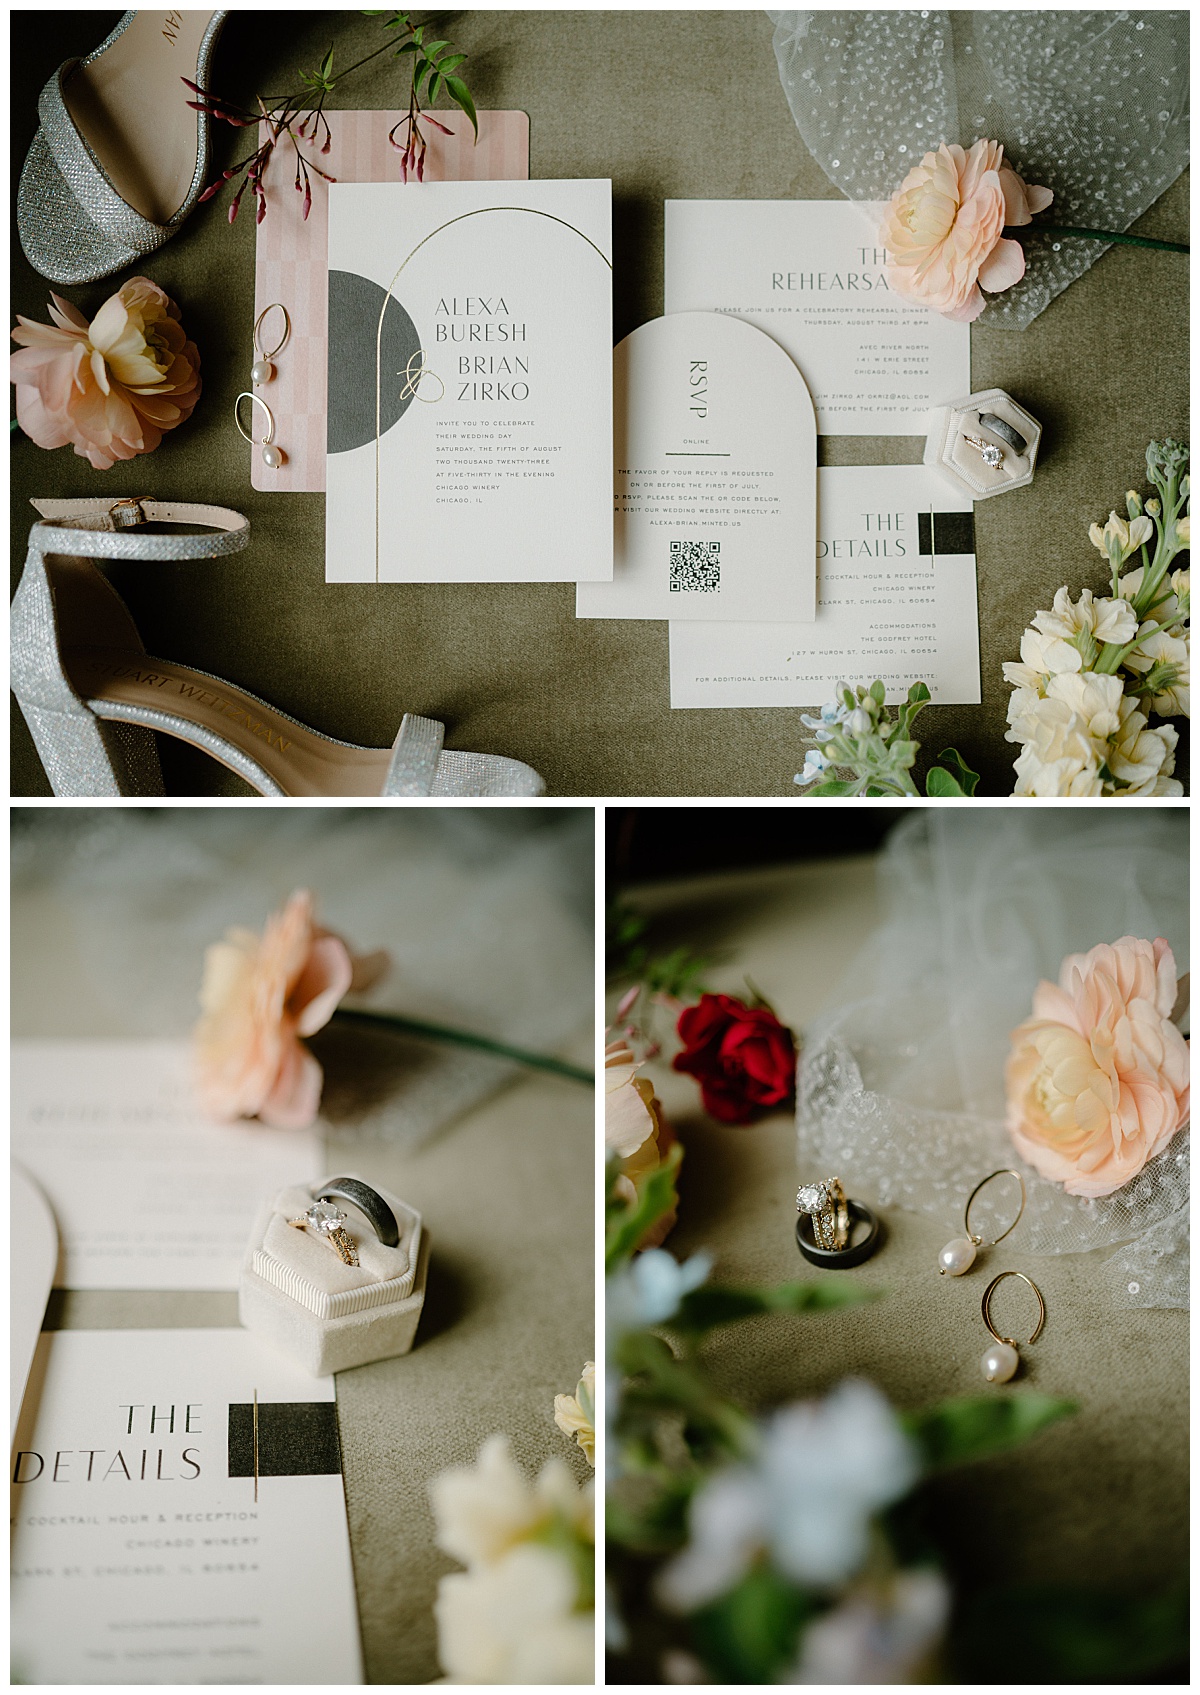 wedding stationery arranged with flowers, shoes, and florals at Chicago Winery